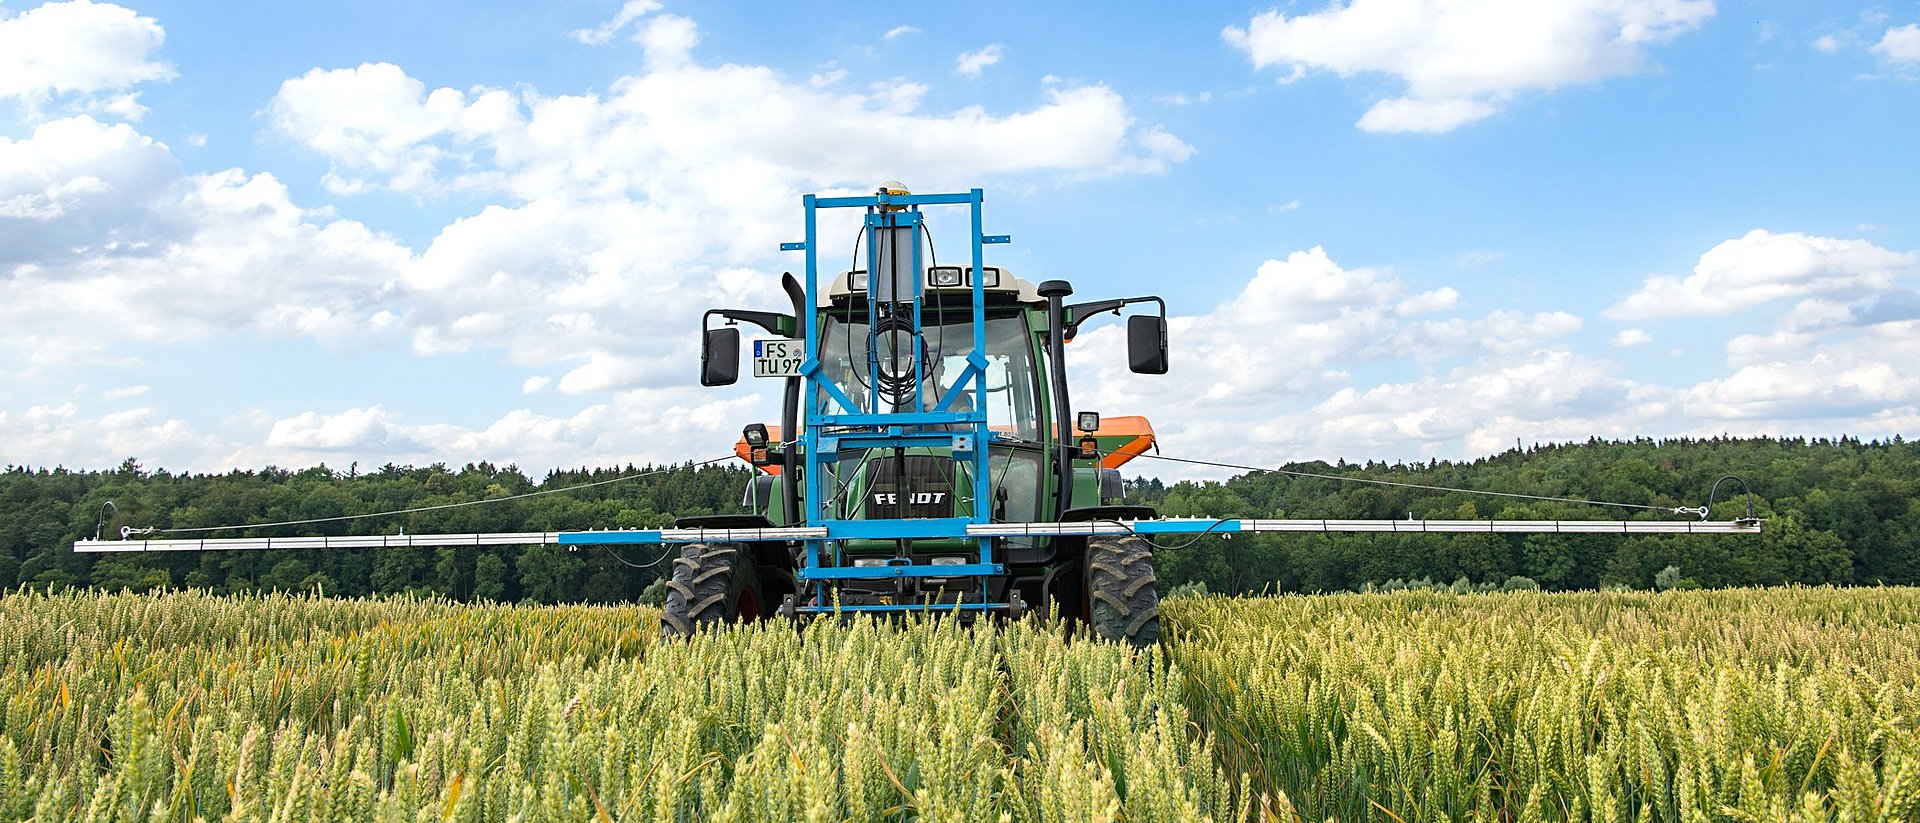 Tractor in grain field with front mounted device with sensors.